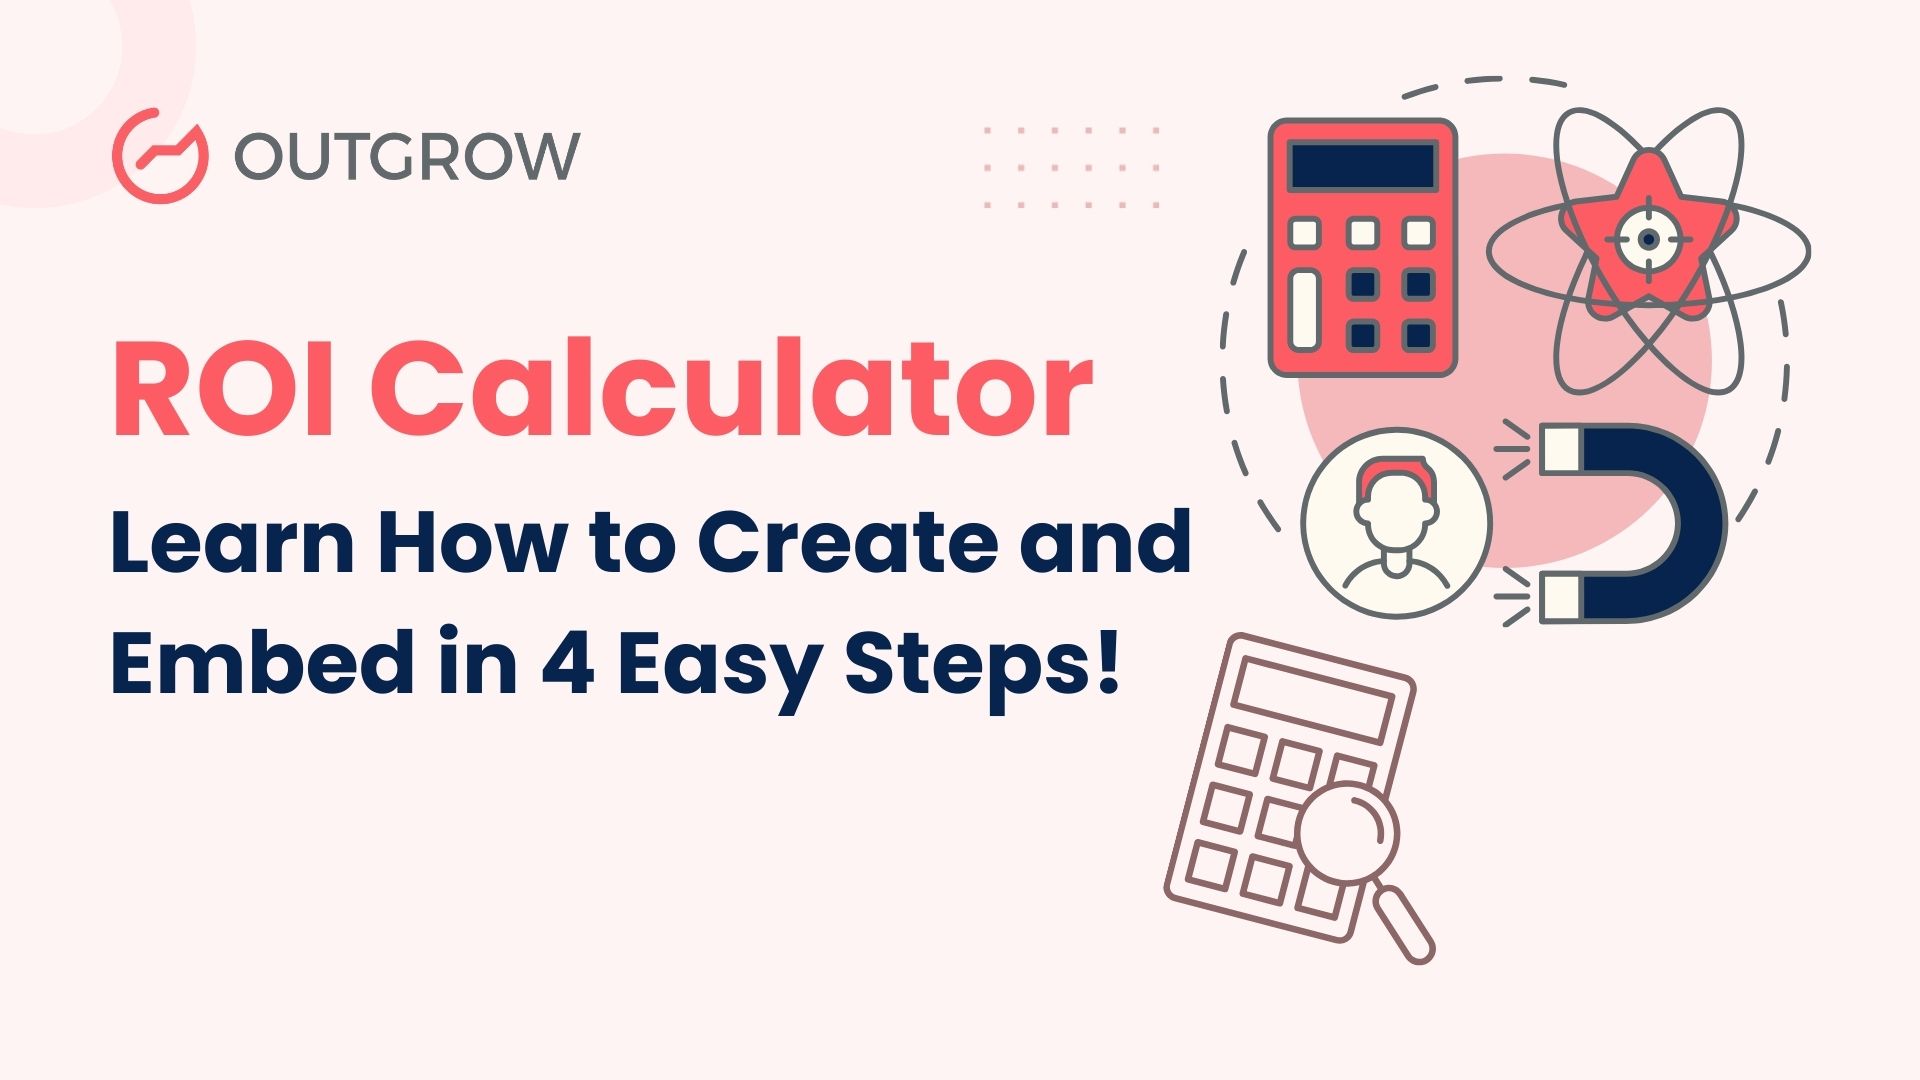 ROI Calculator: Learn How to Create and Embed in 4 Easy Steps!